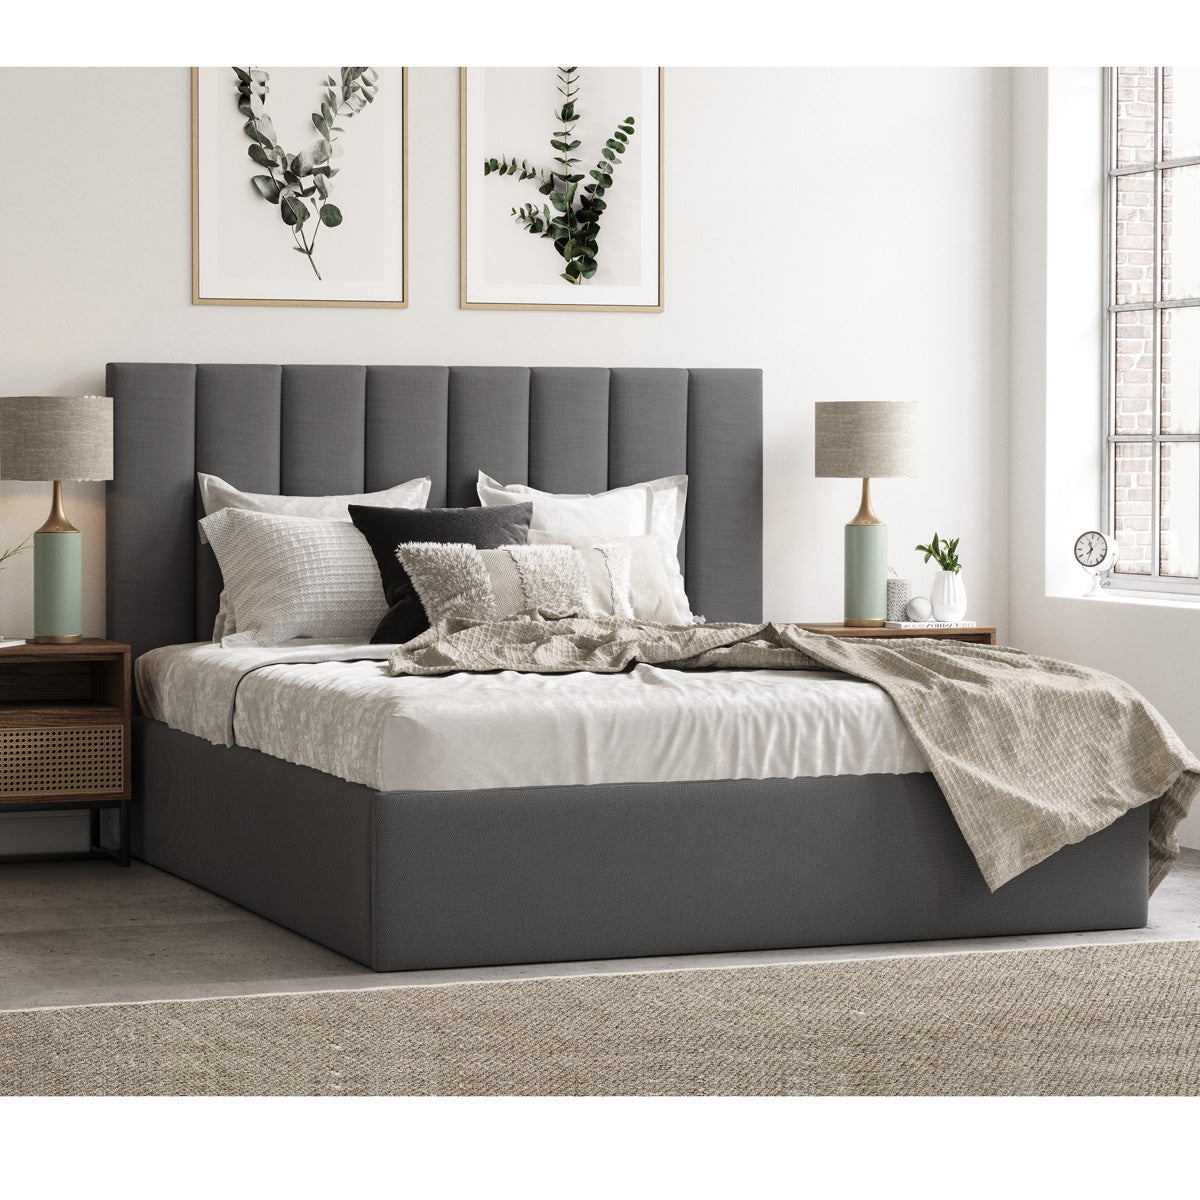 Celine Gas Lift Storage Bed Frame (Charcoal Fabric)